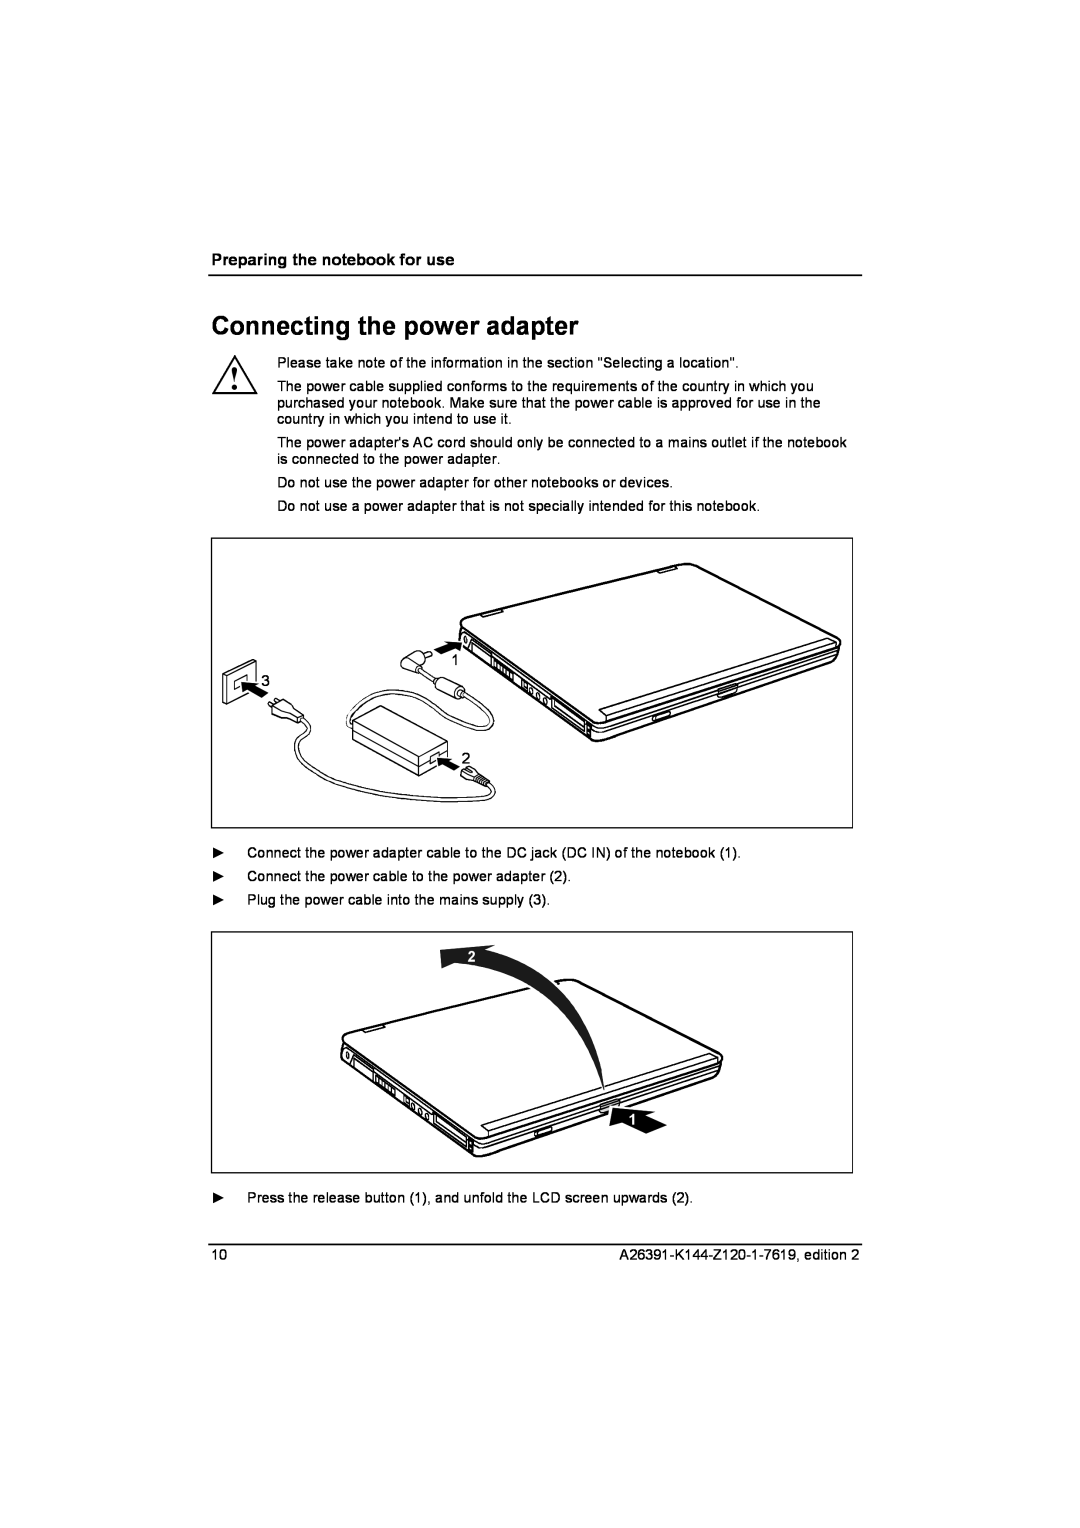 Fujitsu S SERIES manual Connecting the power adapter, Preparing the notebook for use 